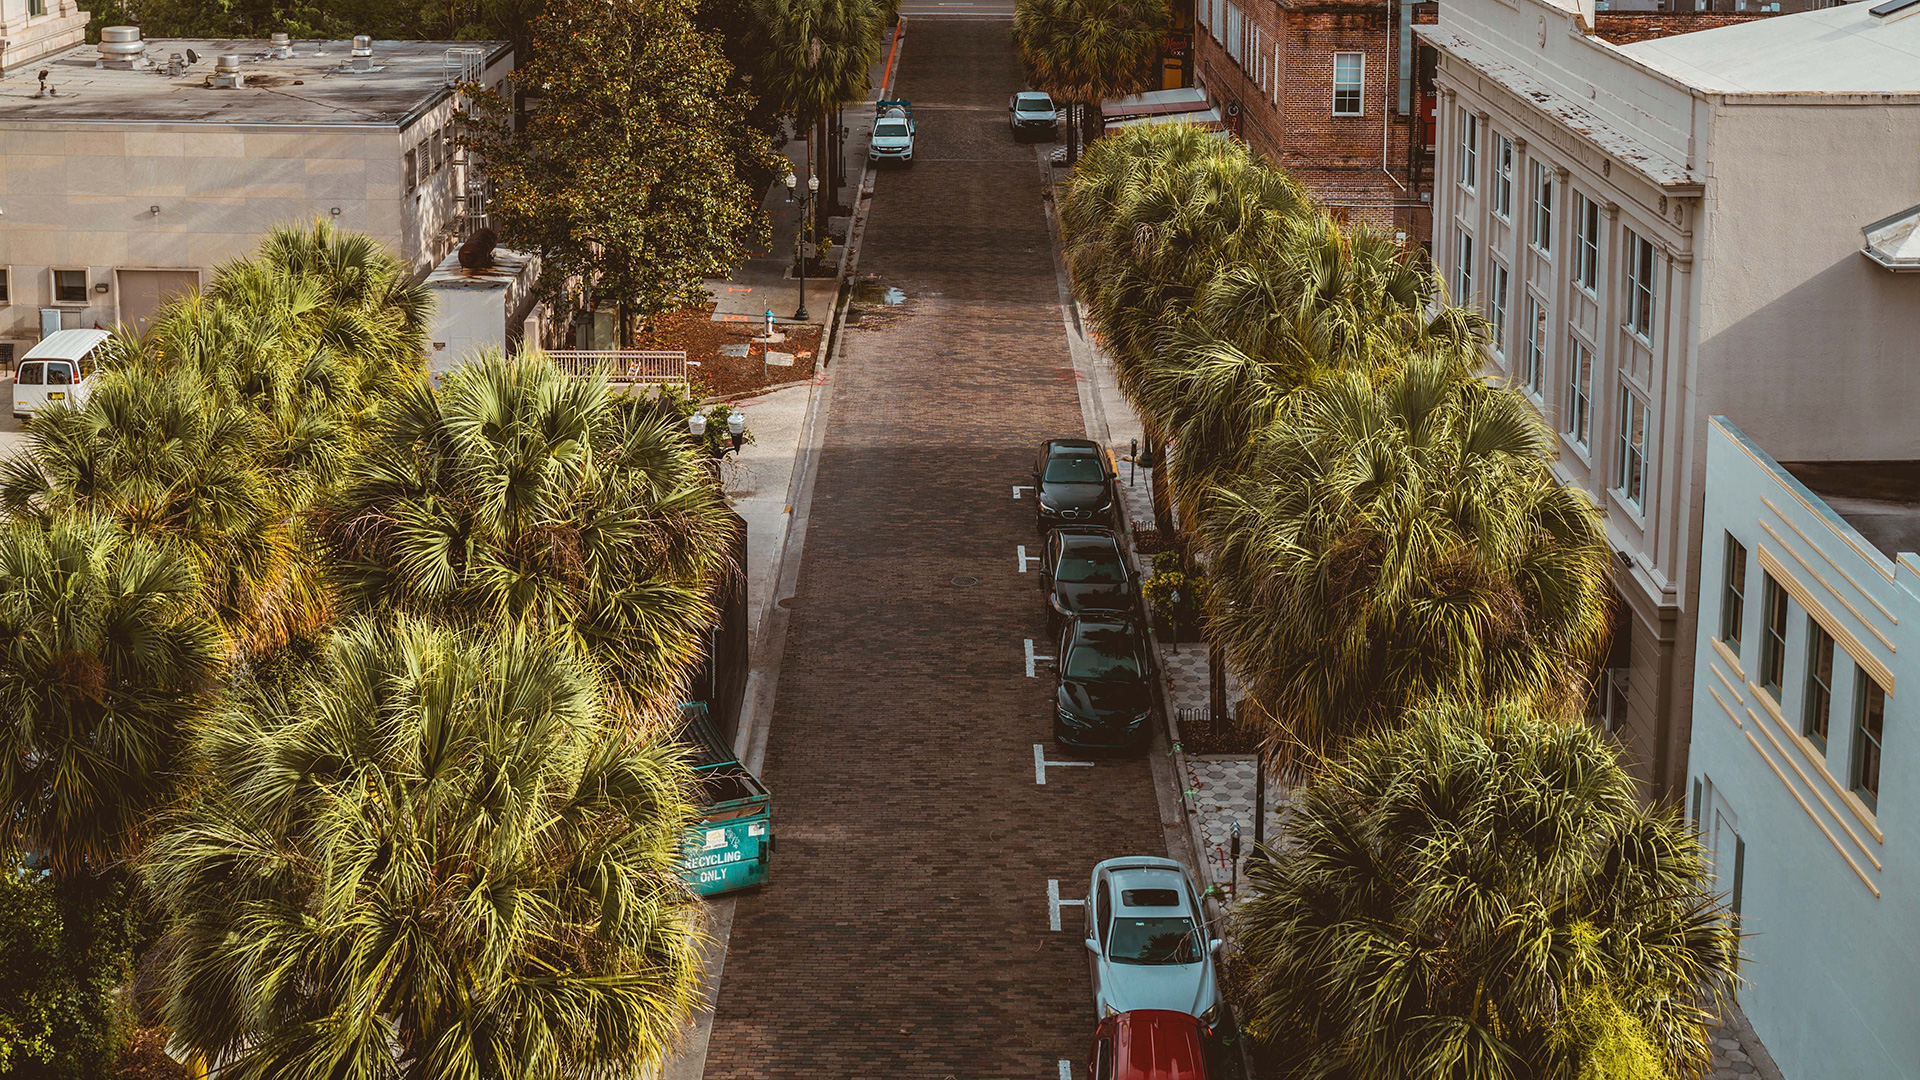 view from above a street in Orange County Florida